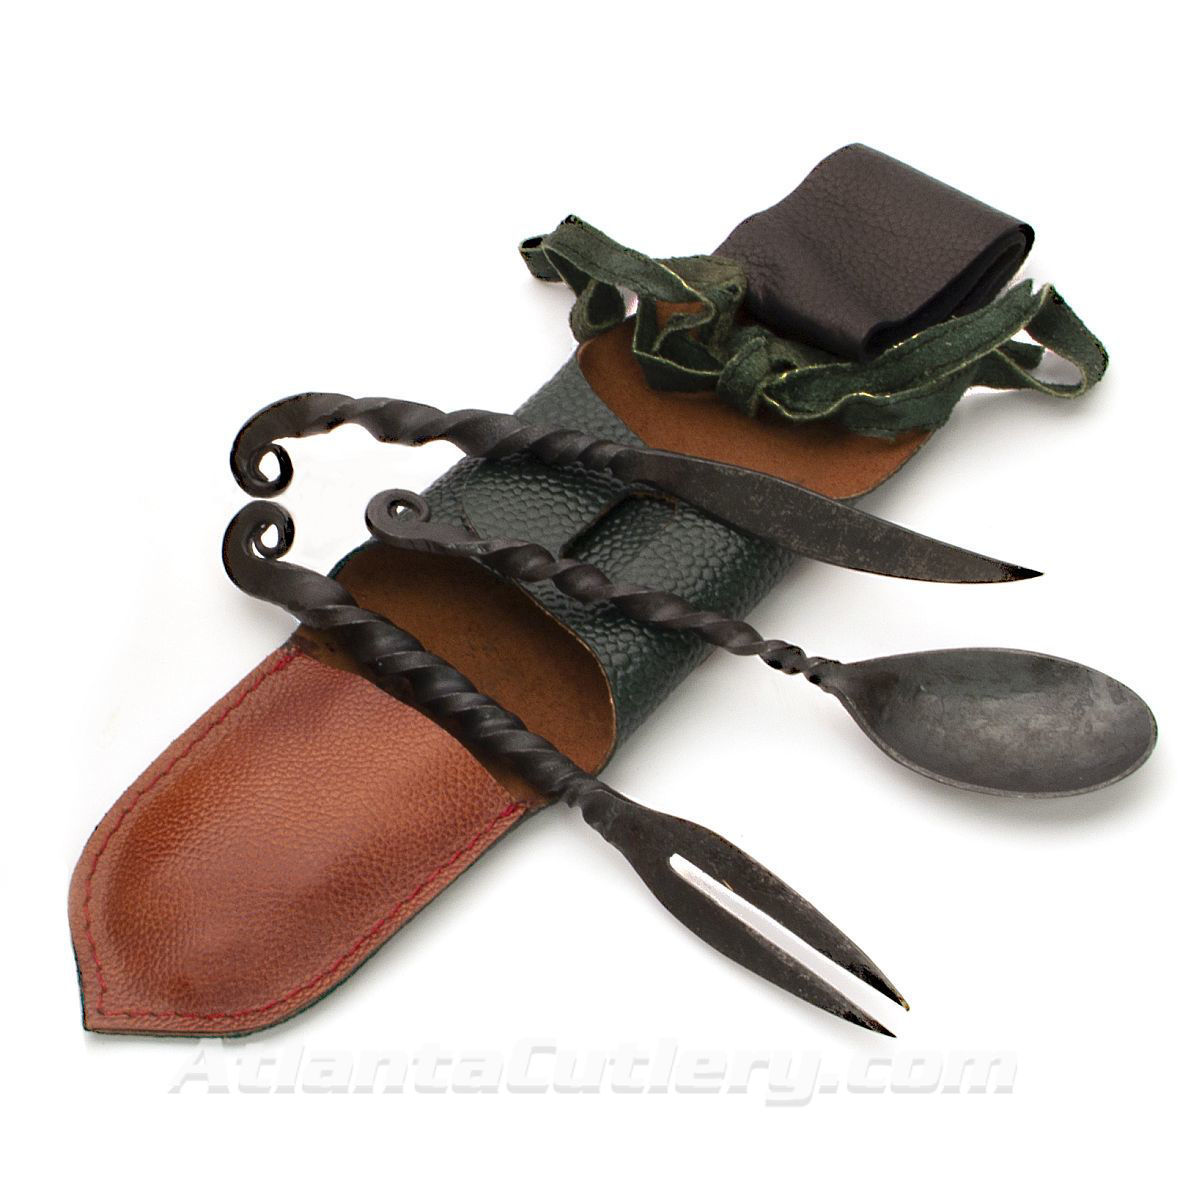 Medieval Iron Feasting Utensils with Pouch includes Knife, Fork and Spoon